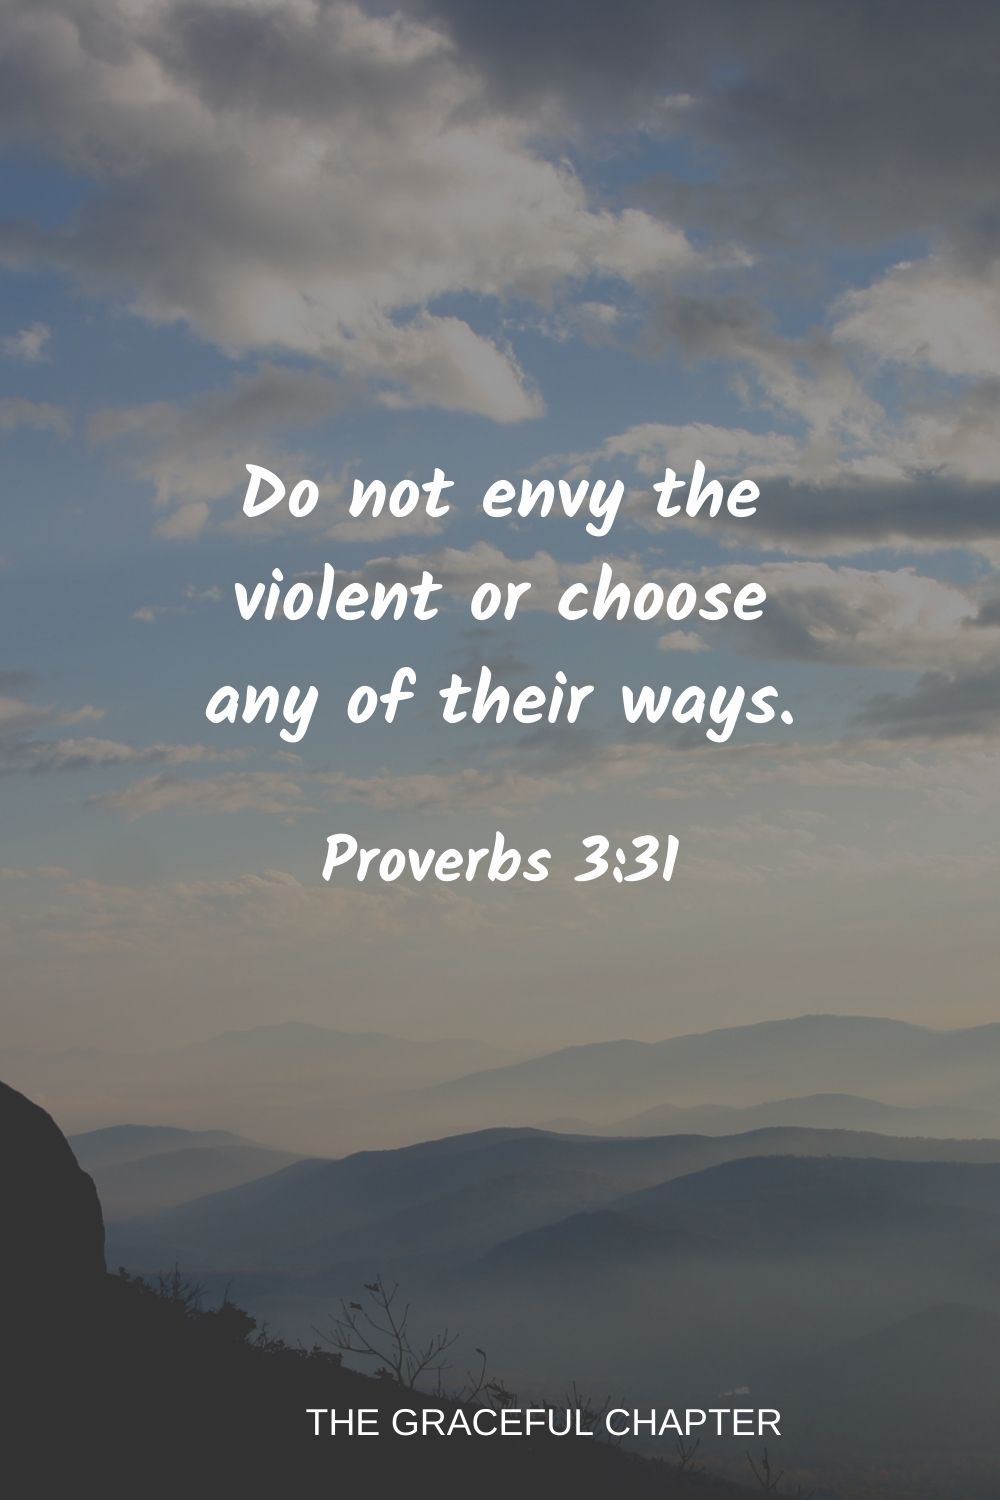 Do not envy the violent or choose any of their ways. Proverbs 3:31